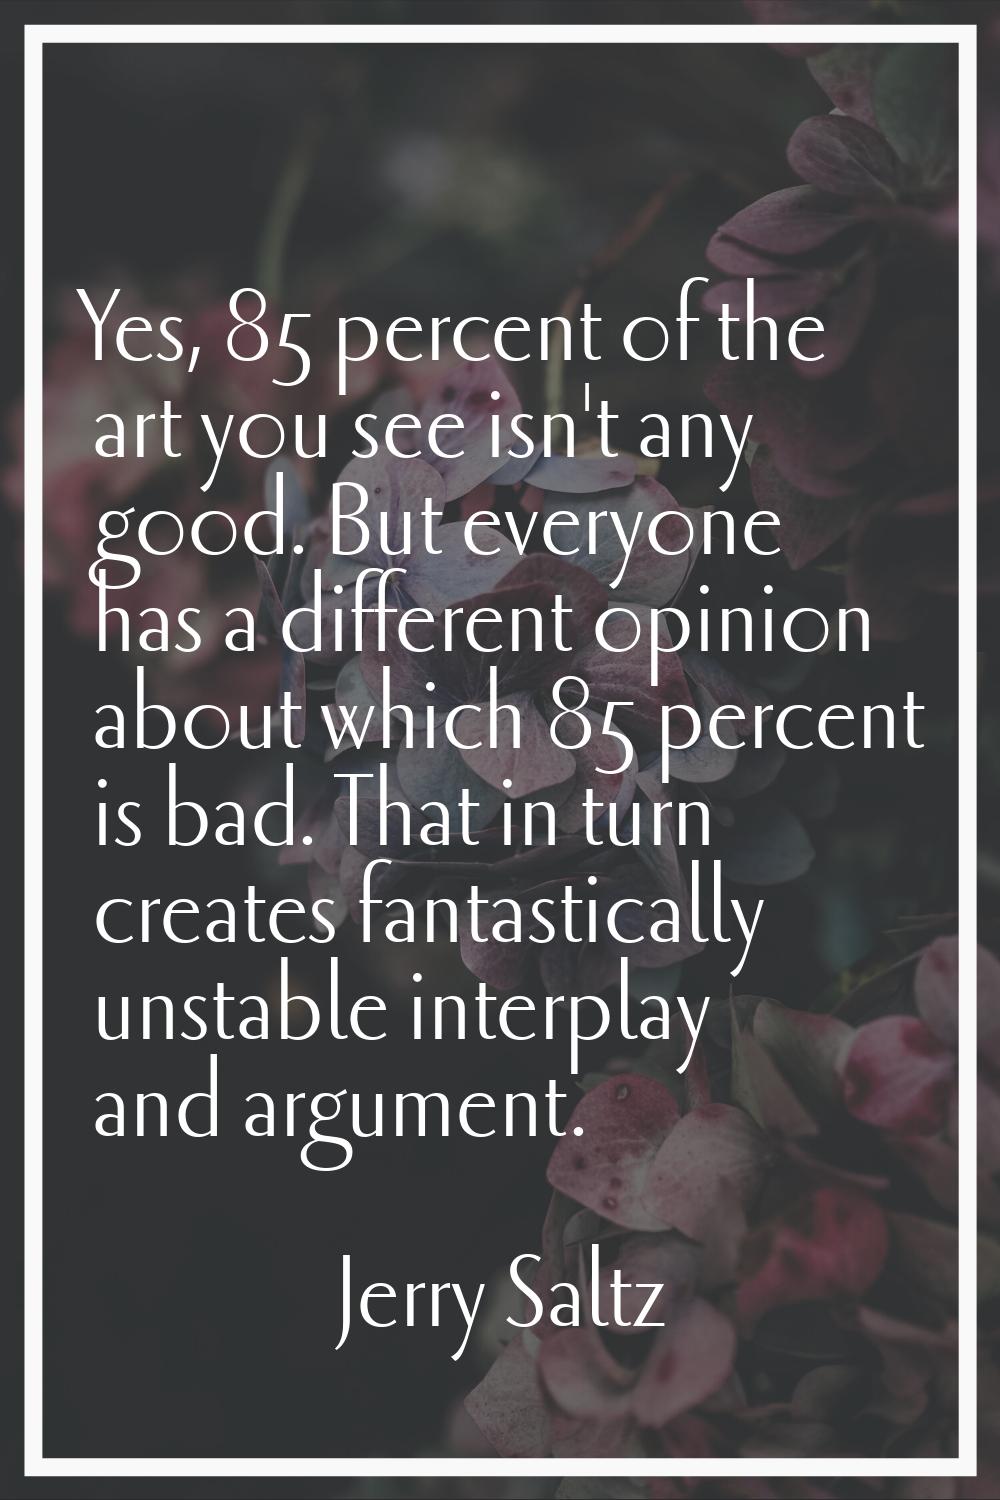 Yes, 85 percent of the art you see isn't any good. But everyone has a different opinion about which